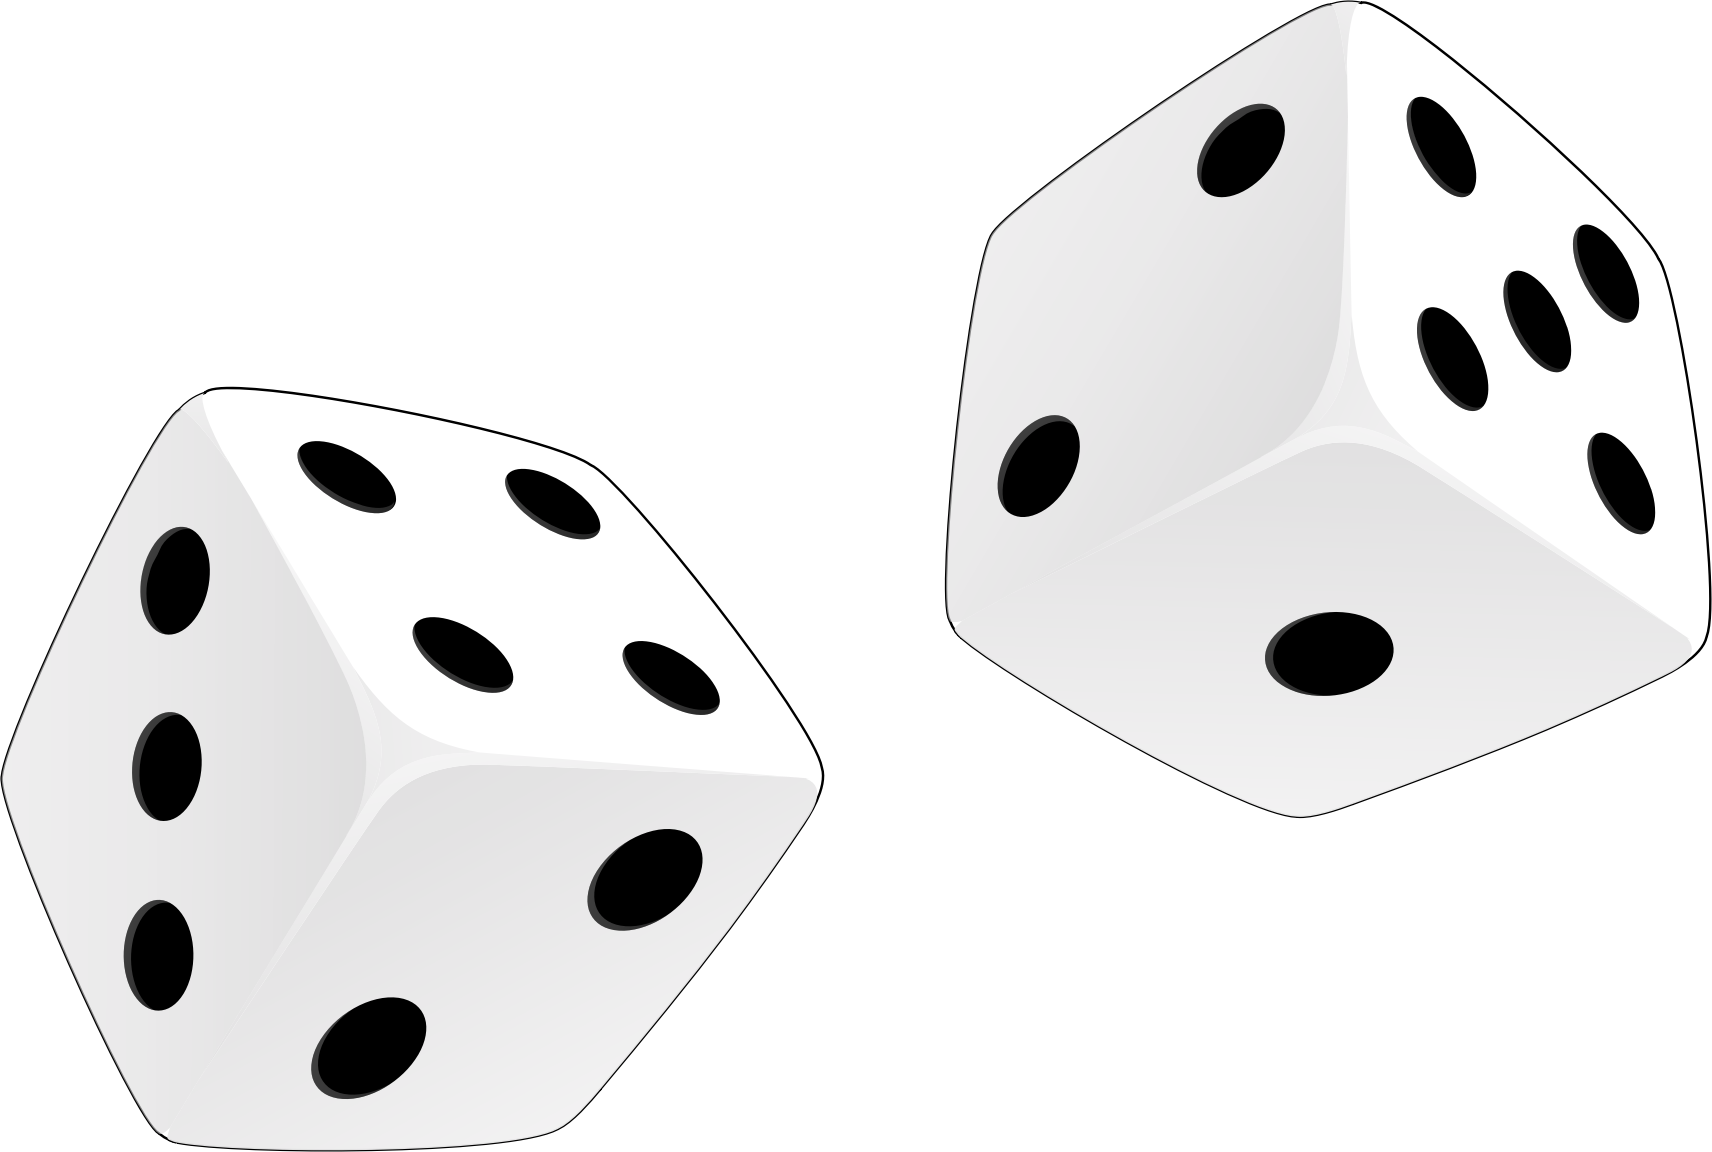 free clipart images dice - photo #40